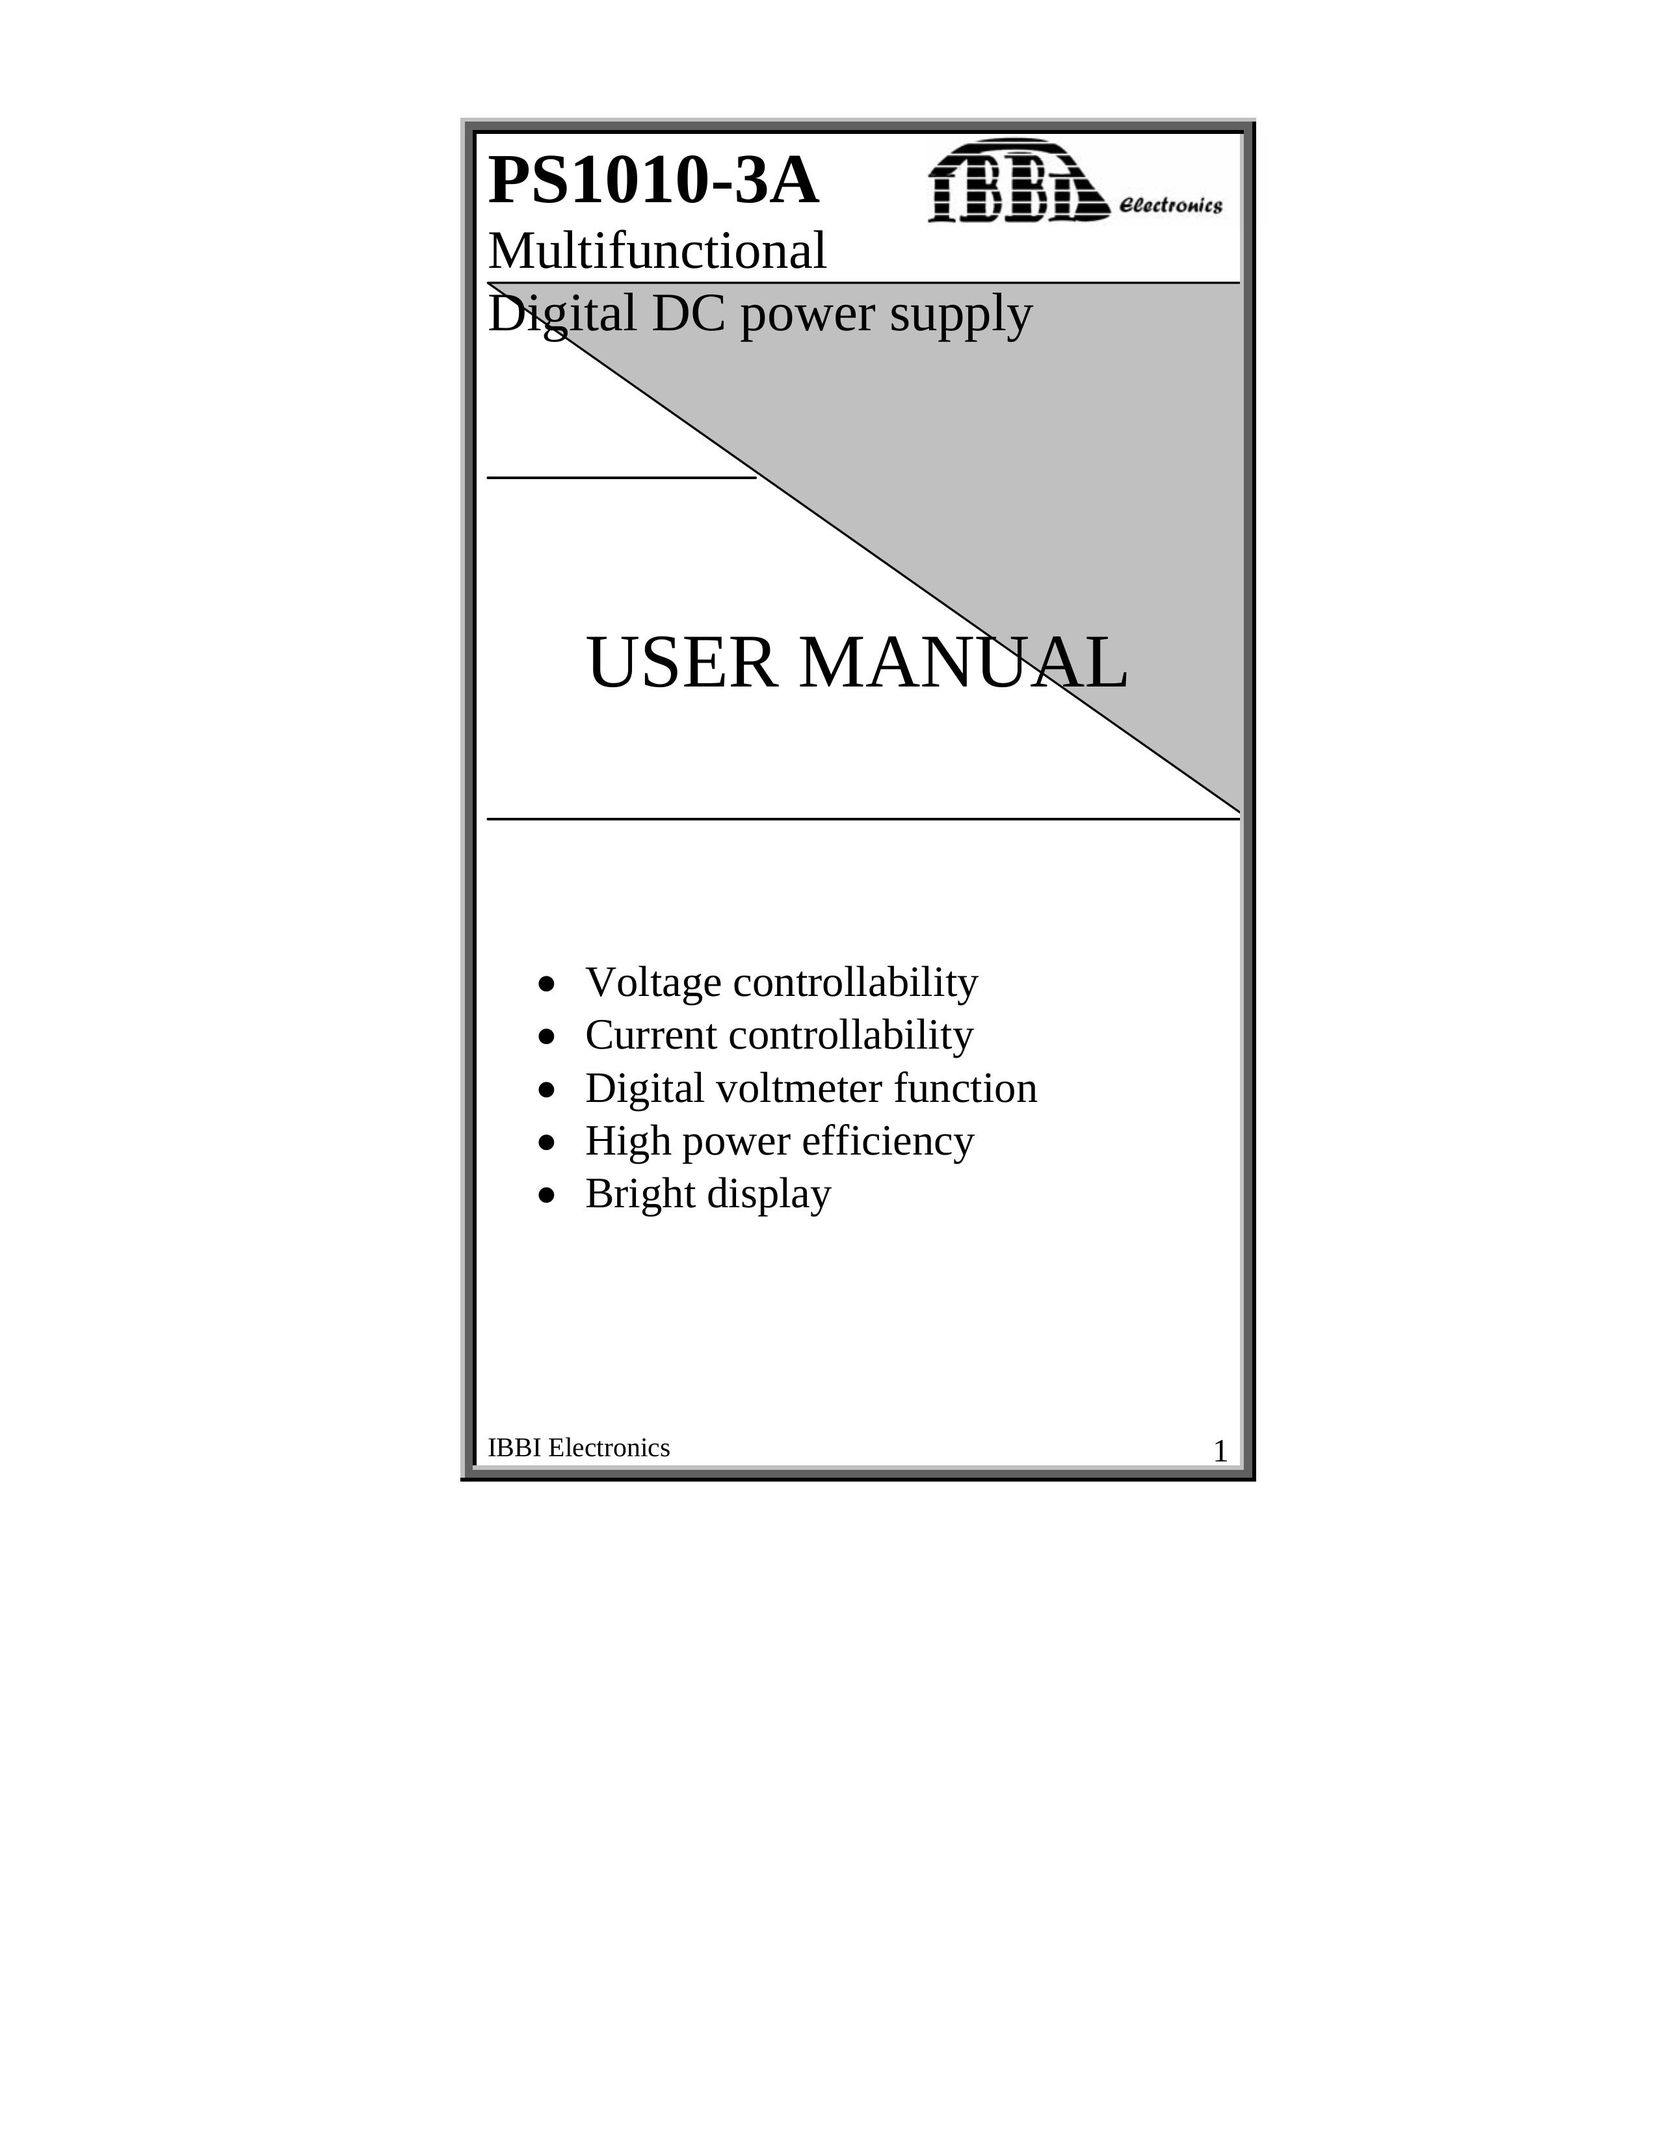 First Virtual Communications PS1010-3A Power Supply User Manual